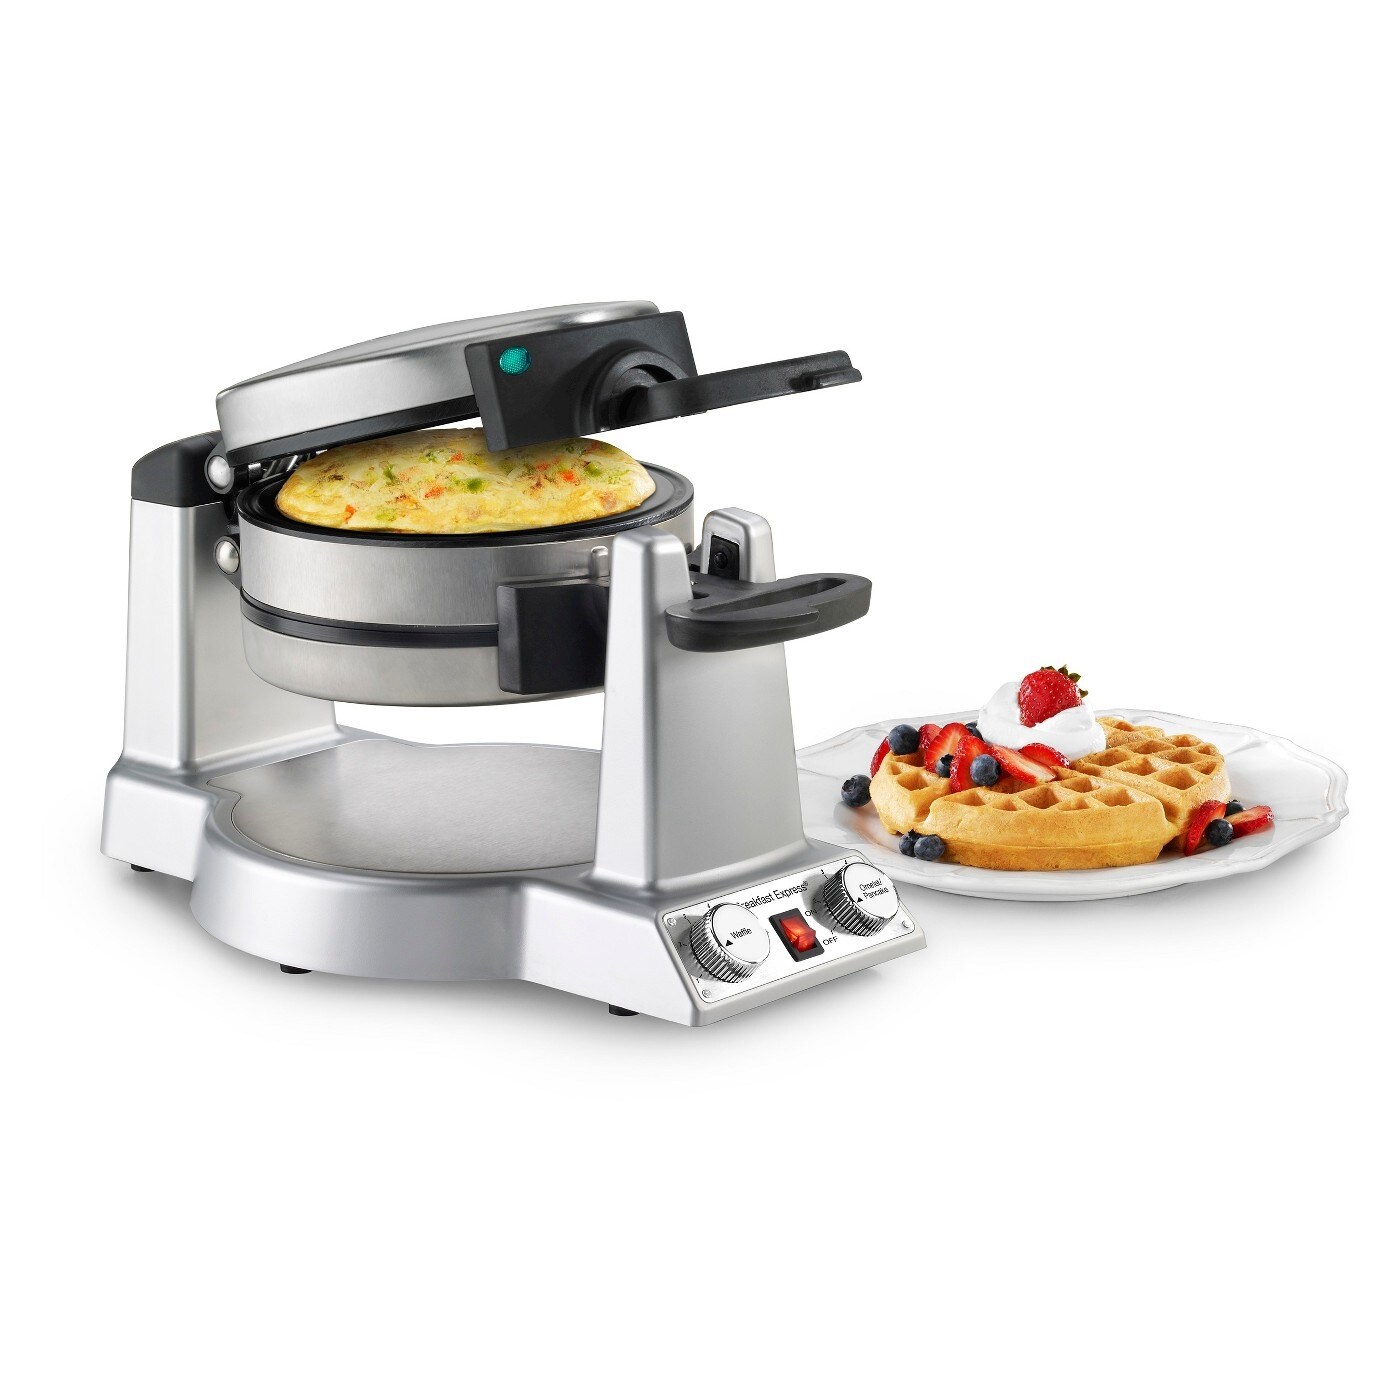 https://ak1.ostkcdn.com/images/products/is/images/direct/775d9d224872ddfe2032b7969d9506043a61d591/Cuisinart-WAF-B50-Breakfast-Express-Waffle-Omelet-Maker%2C-Stainless-Steel.jpg